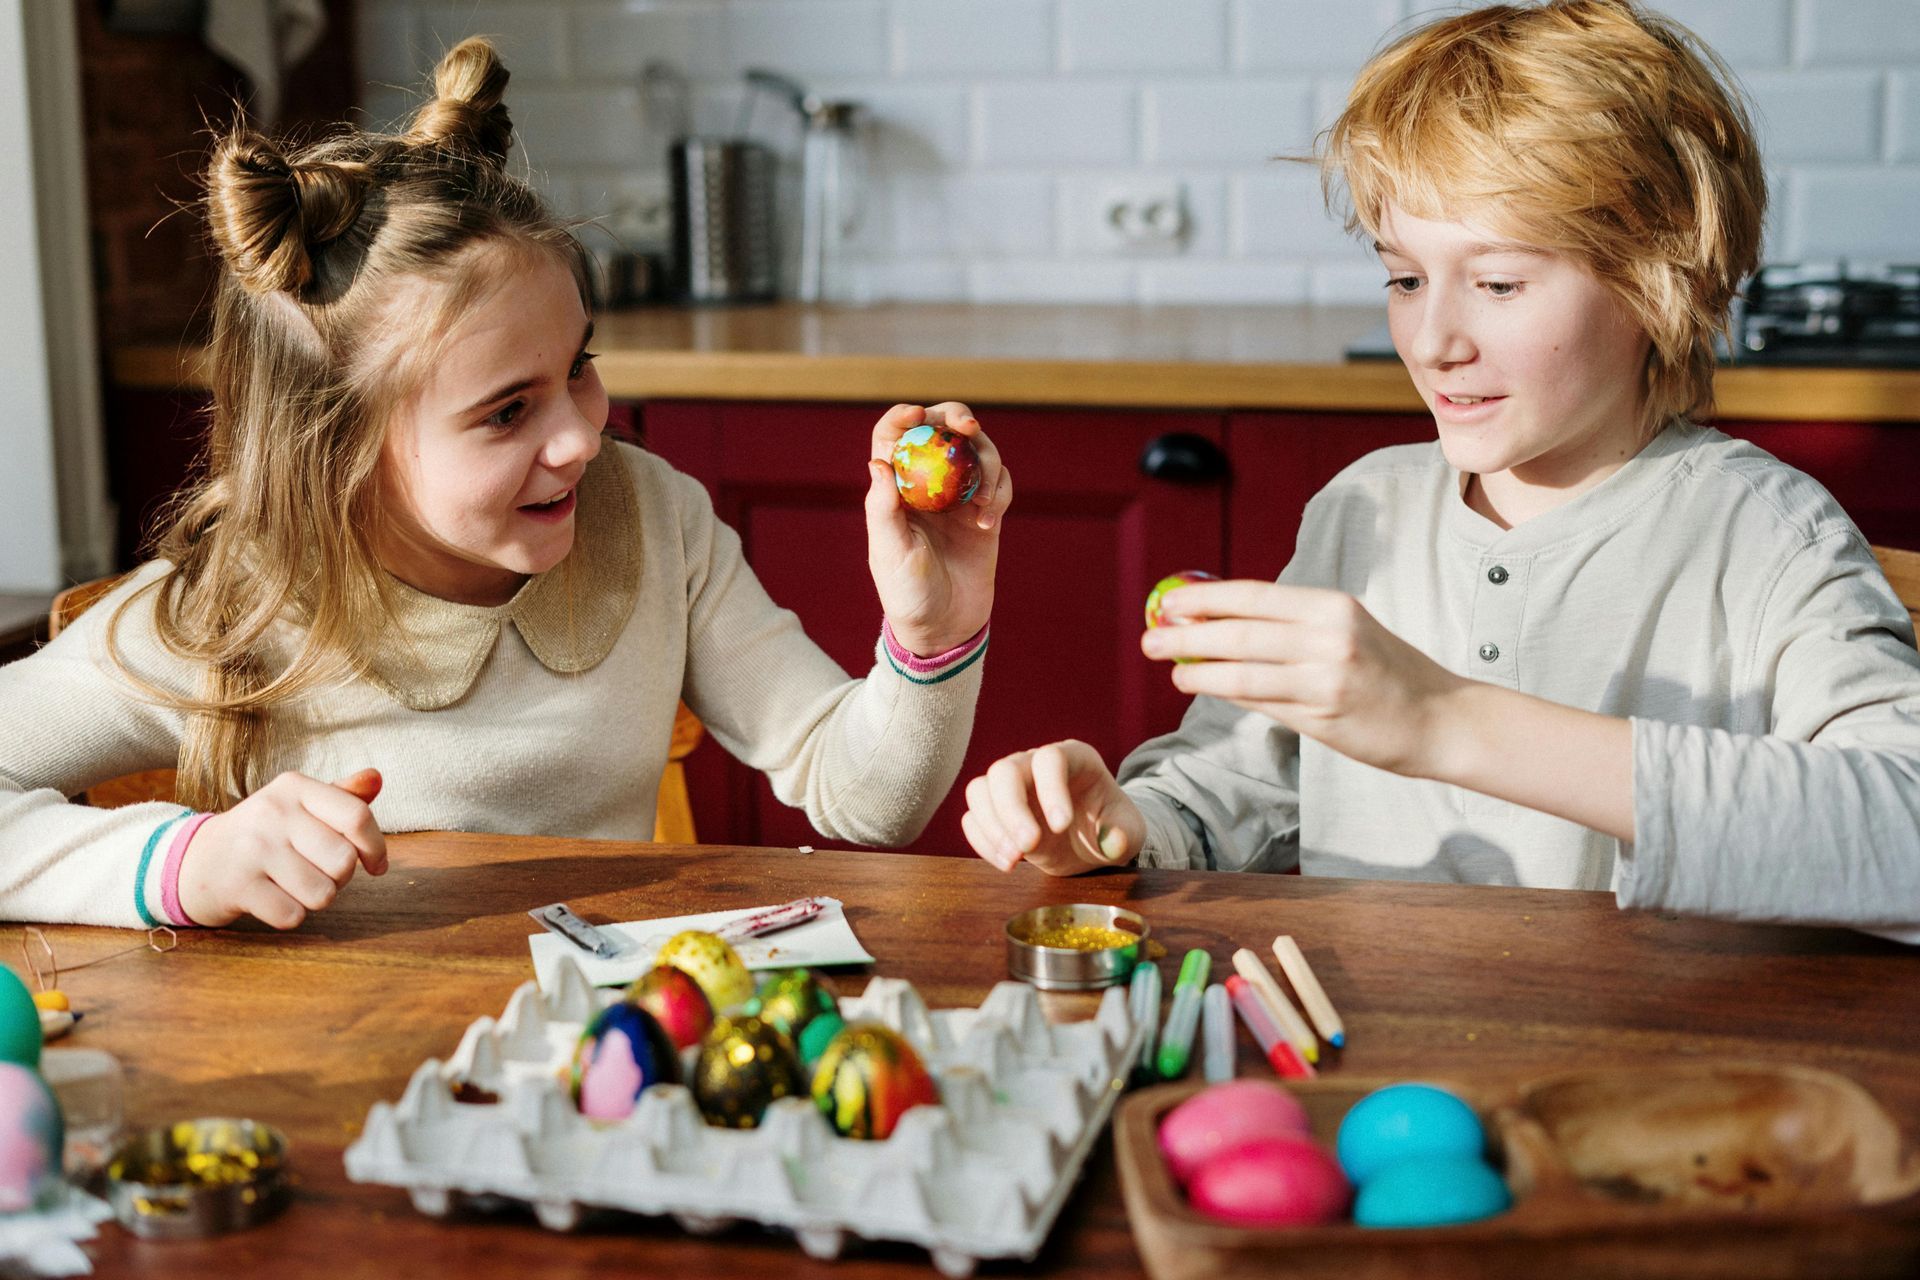 Two children are sitting at a table decorating Easter eggs